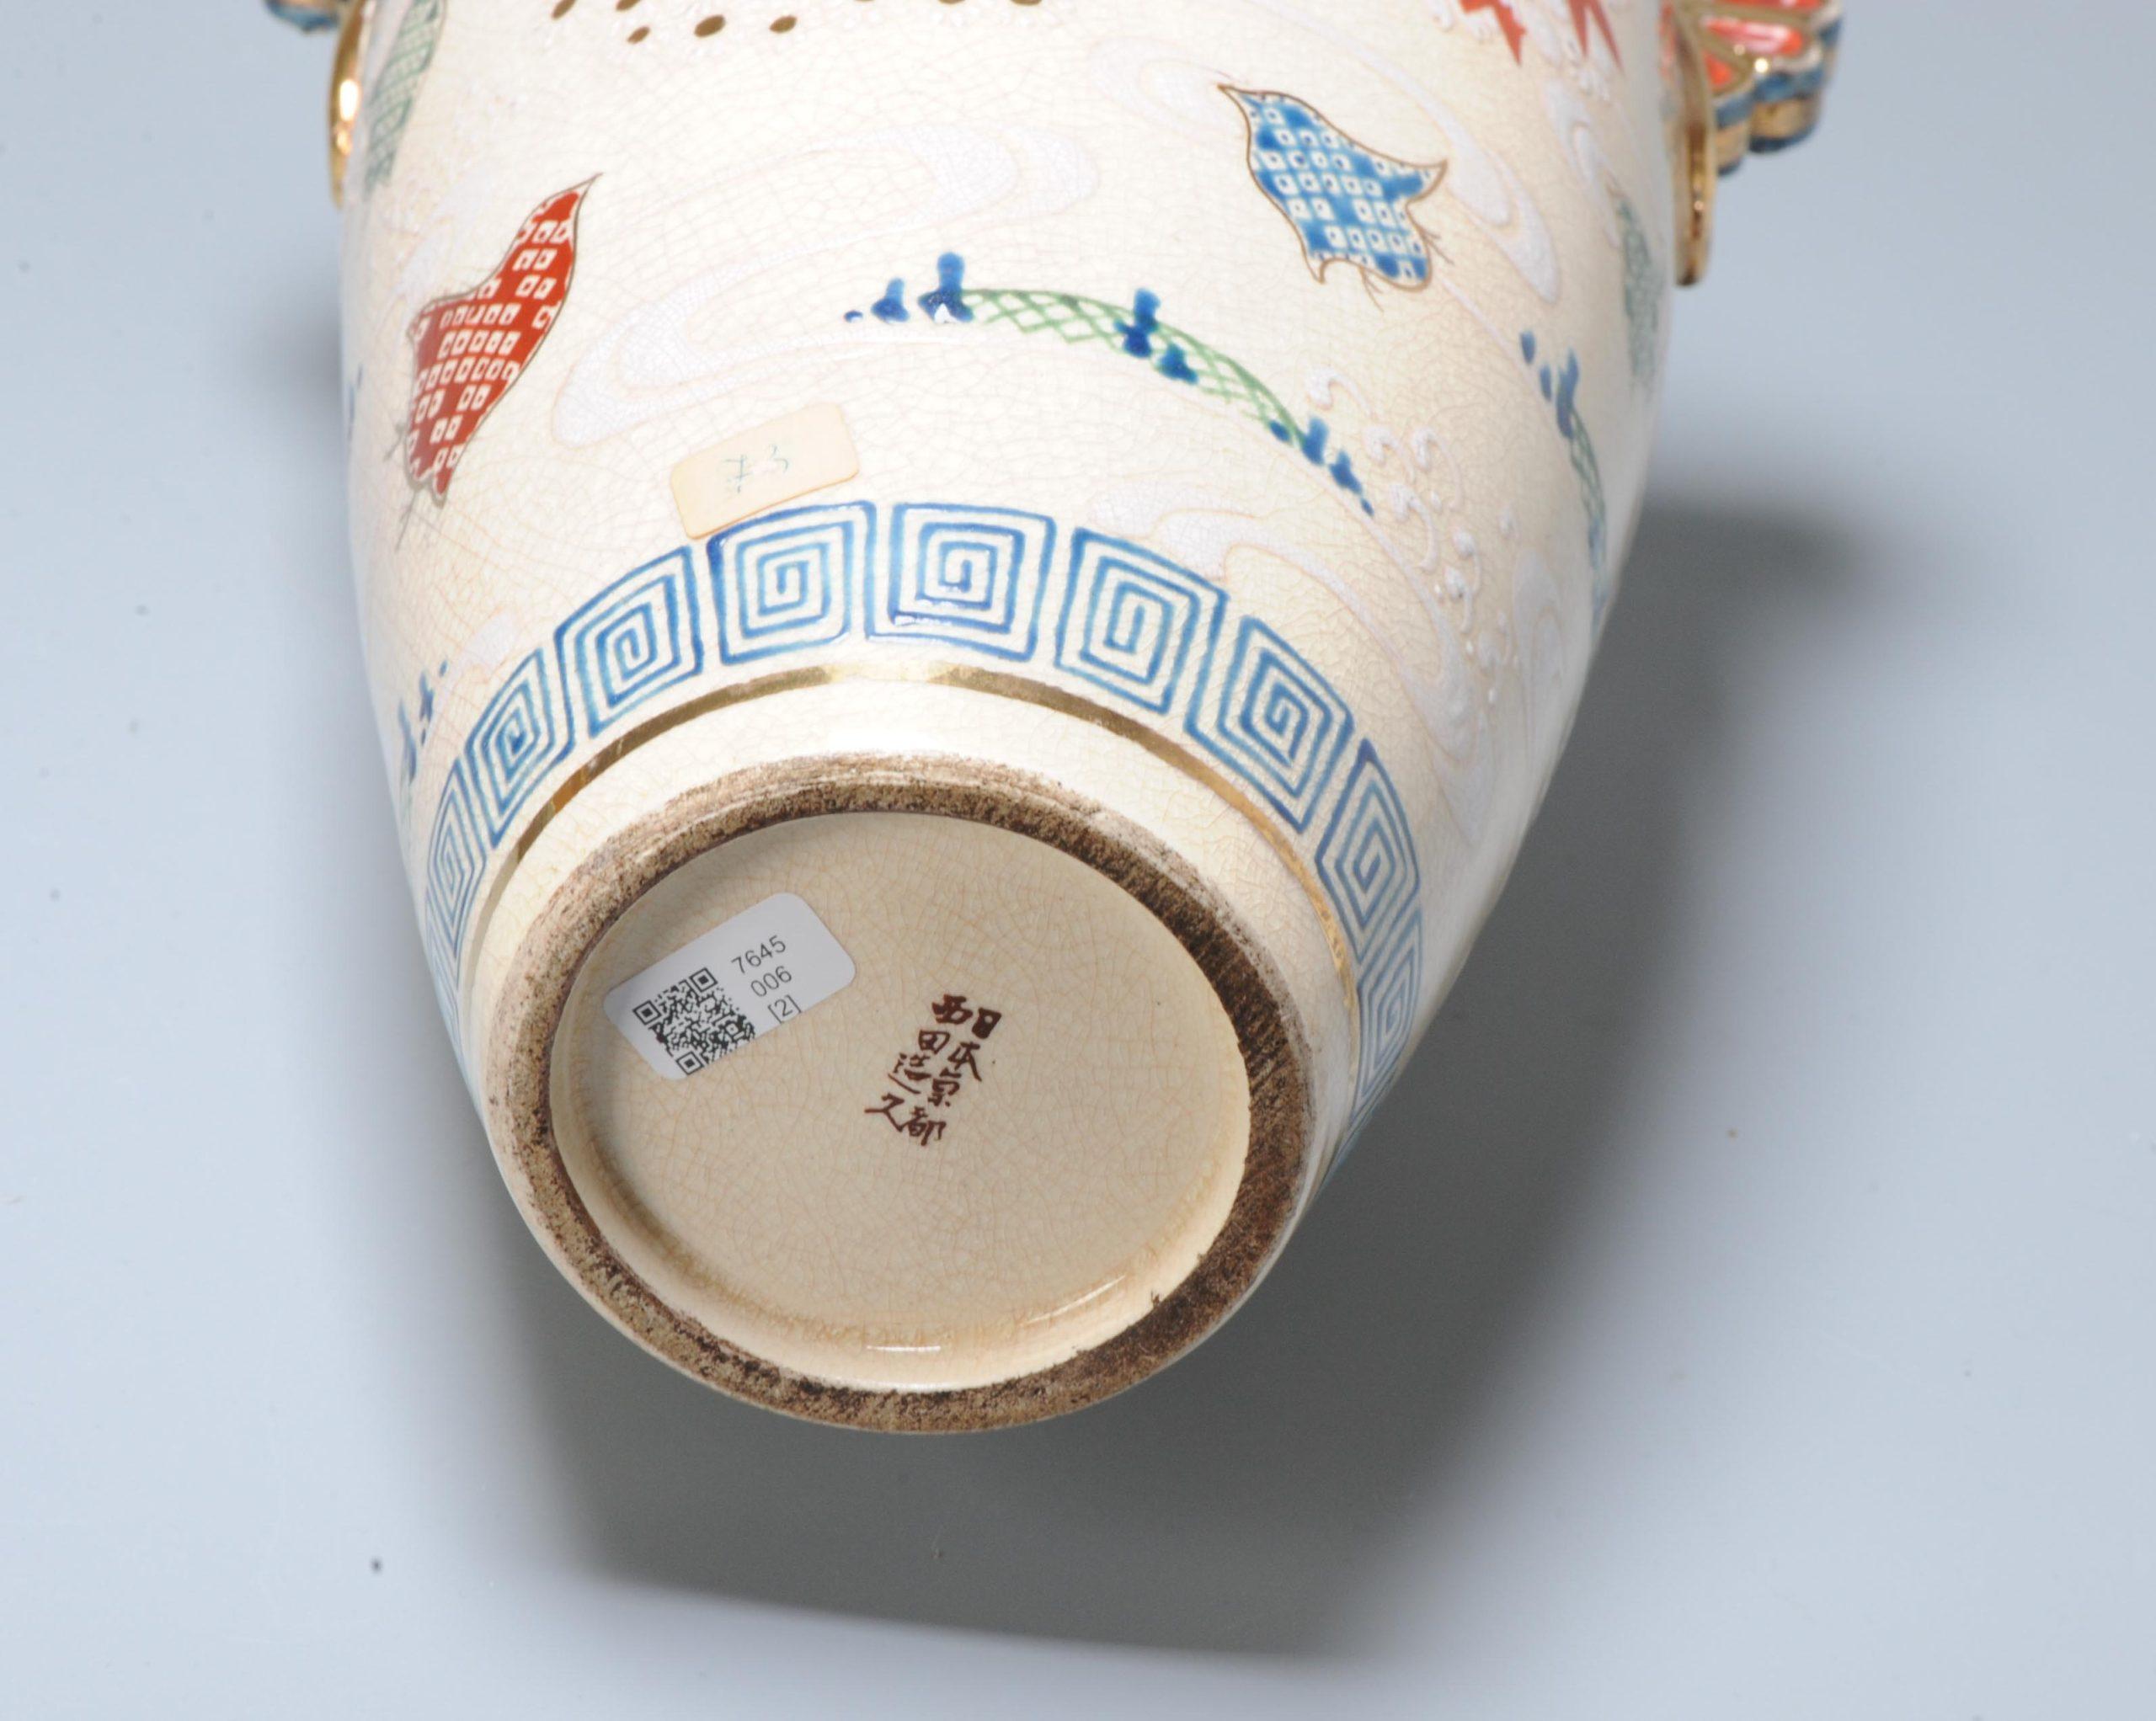 Large Antique Taisho or Showa Period Japanese Satsuma Vase In Good Condition For Sale In Amsterdam, Noord Holland